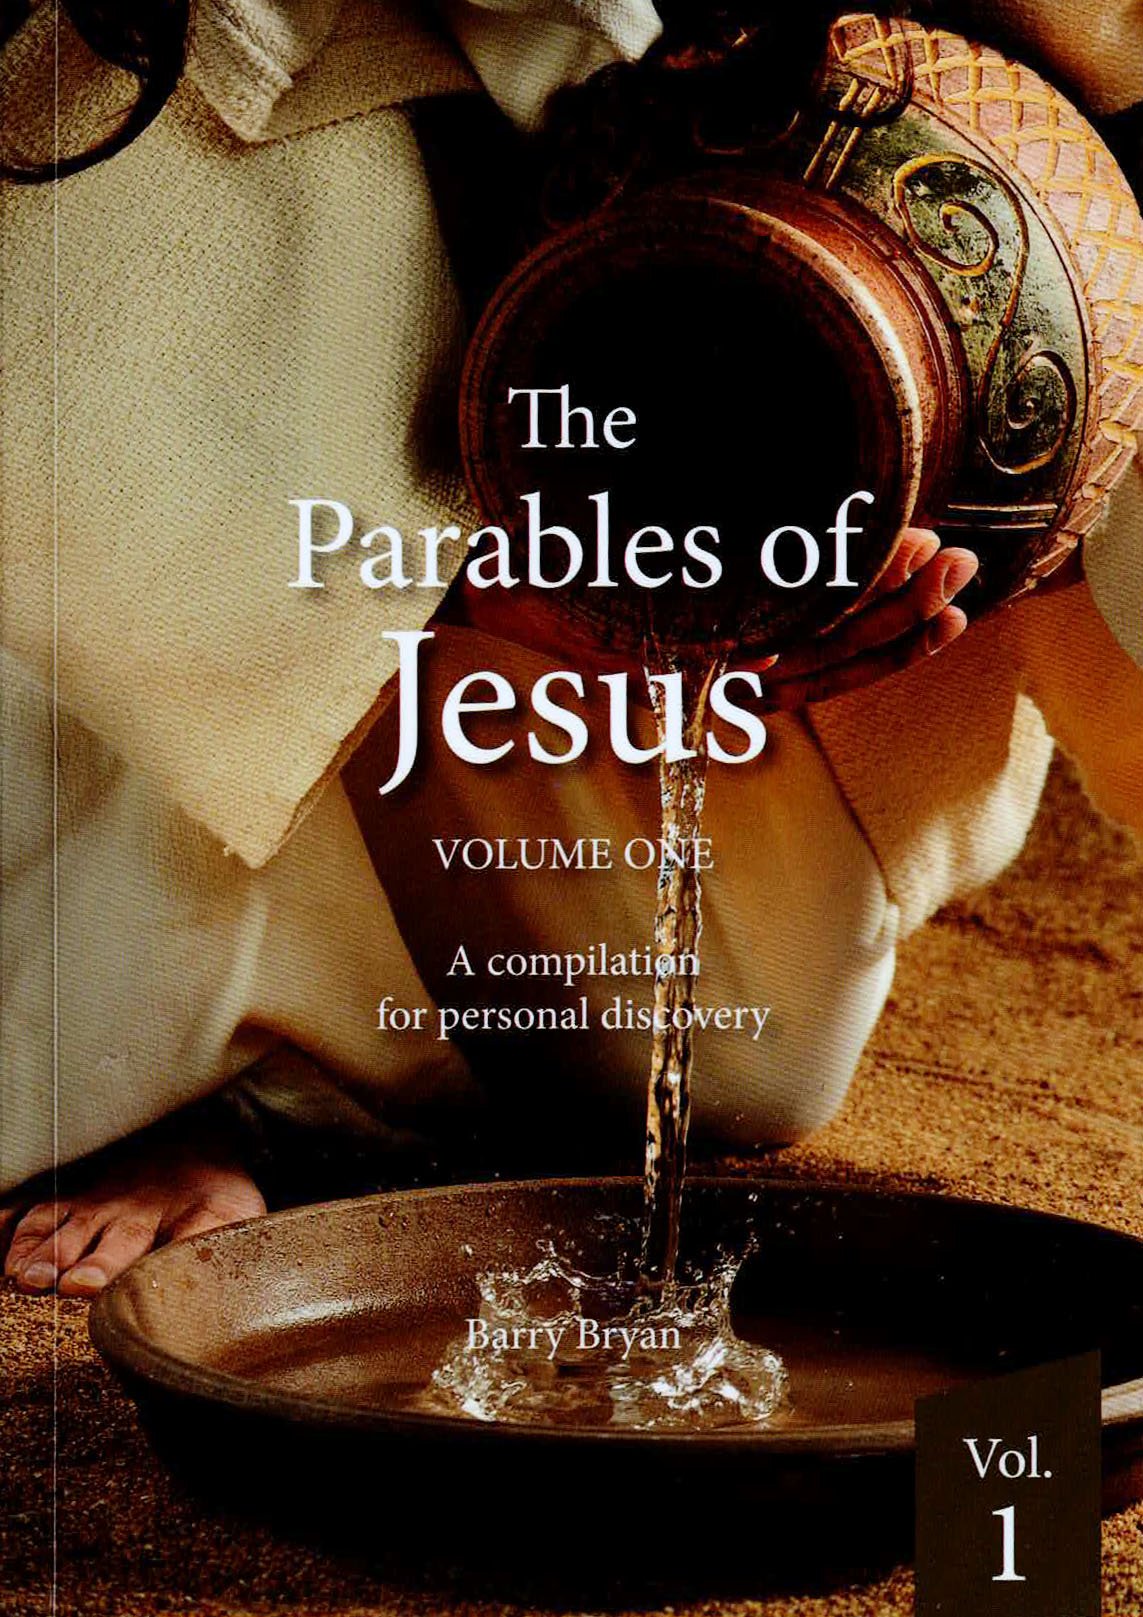 The Parables of Jesus, Vol 2 by Barry Bryan — Wild Side Publishing